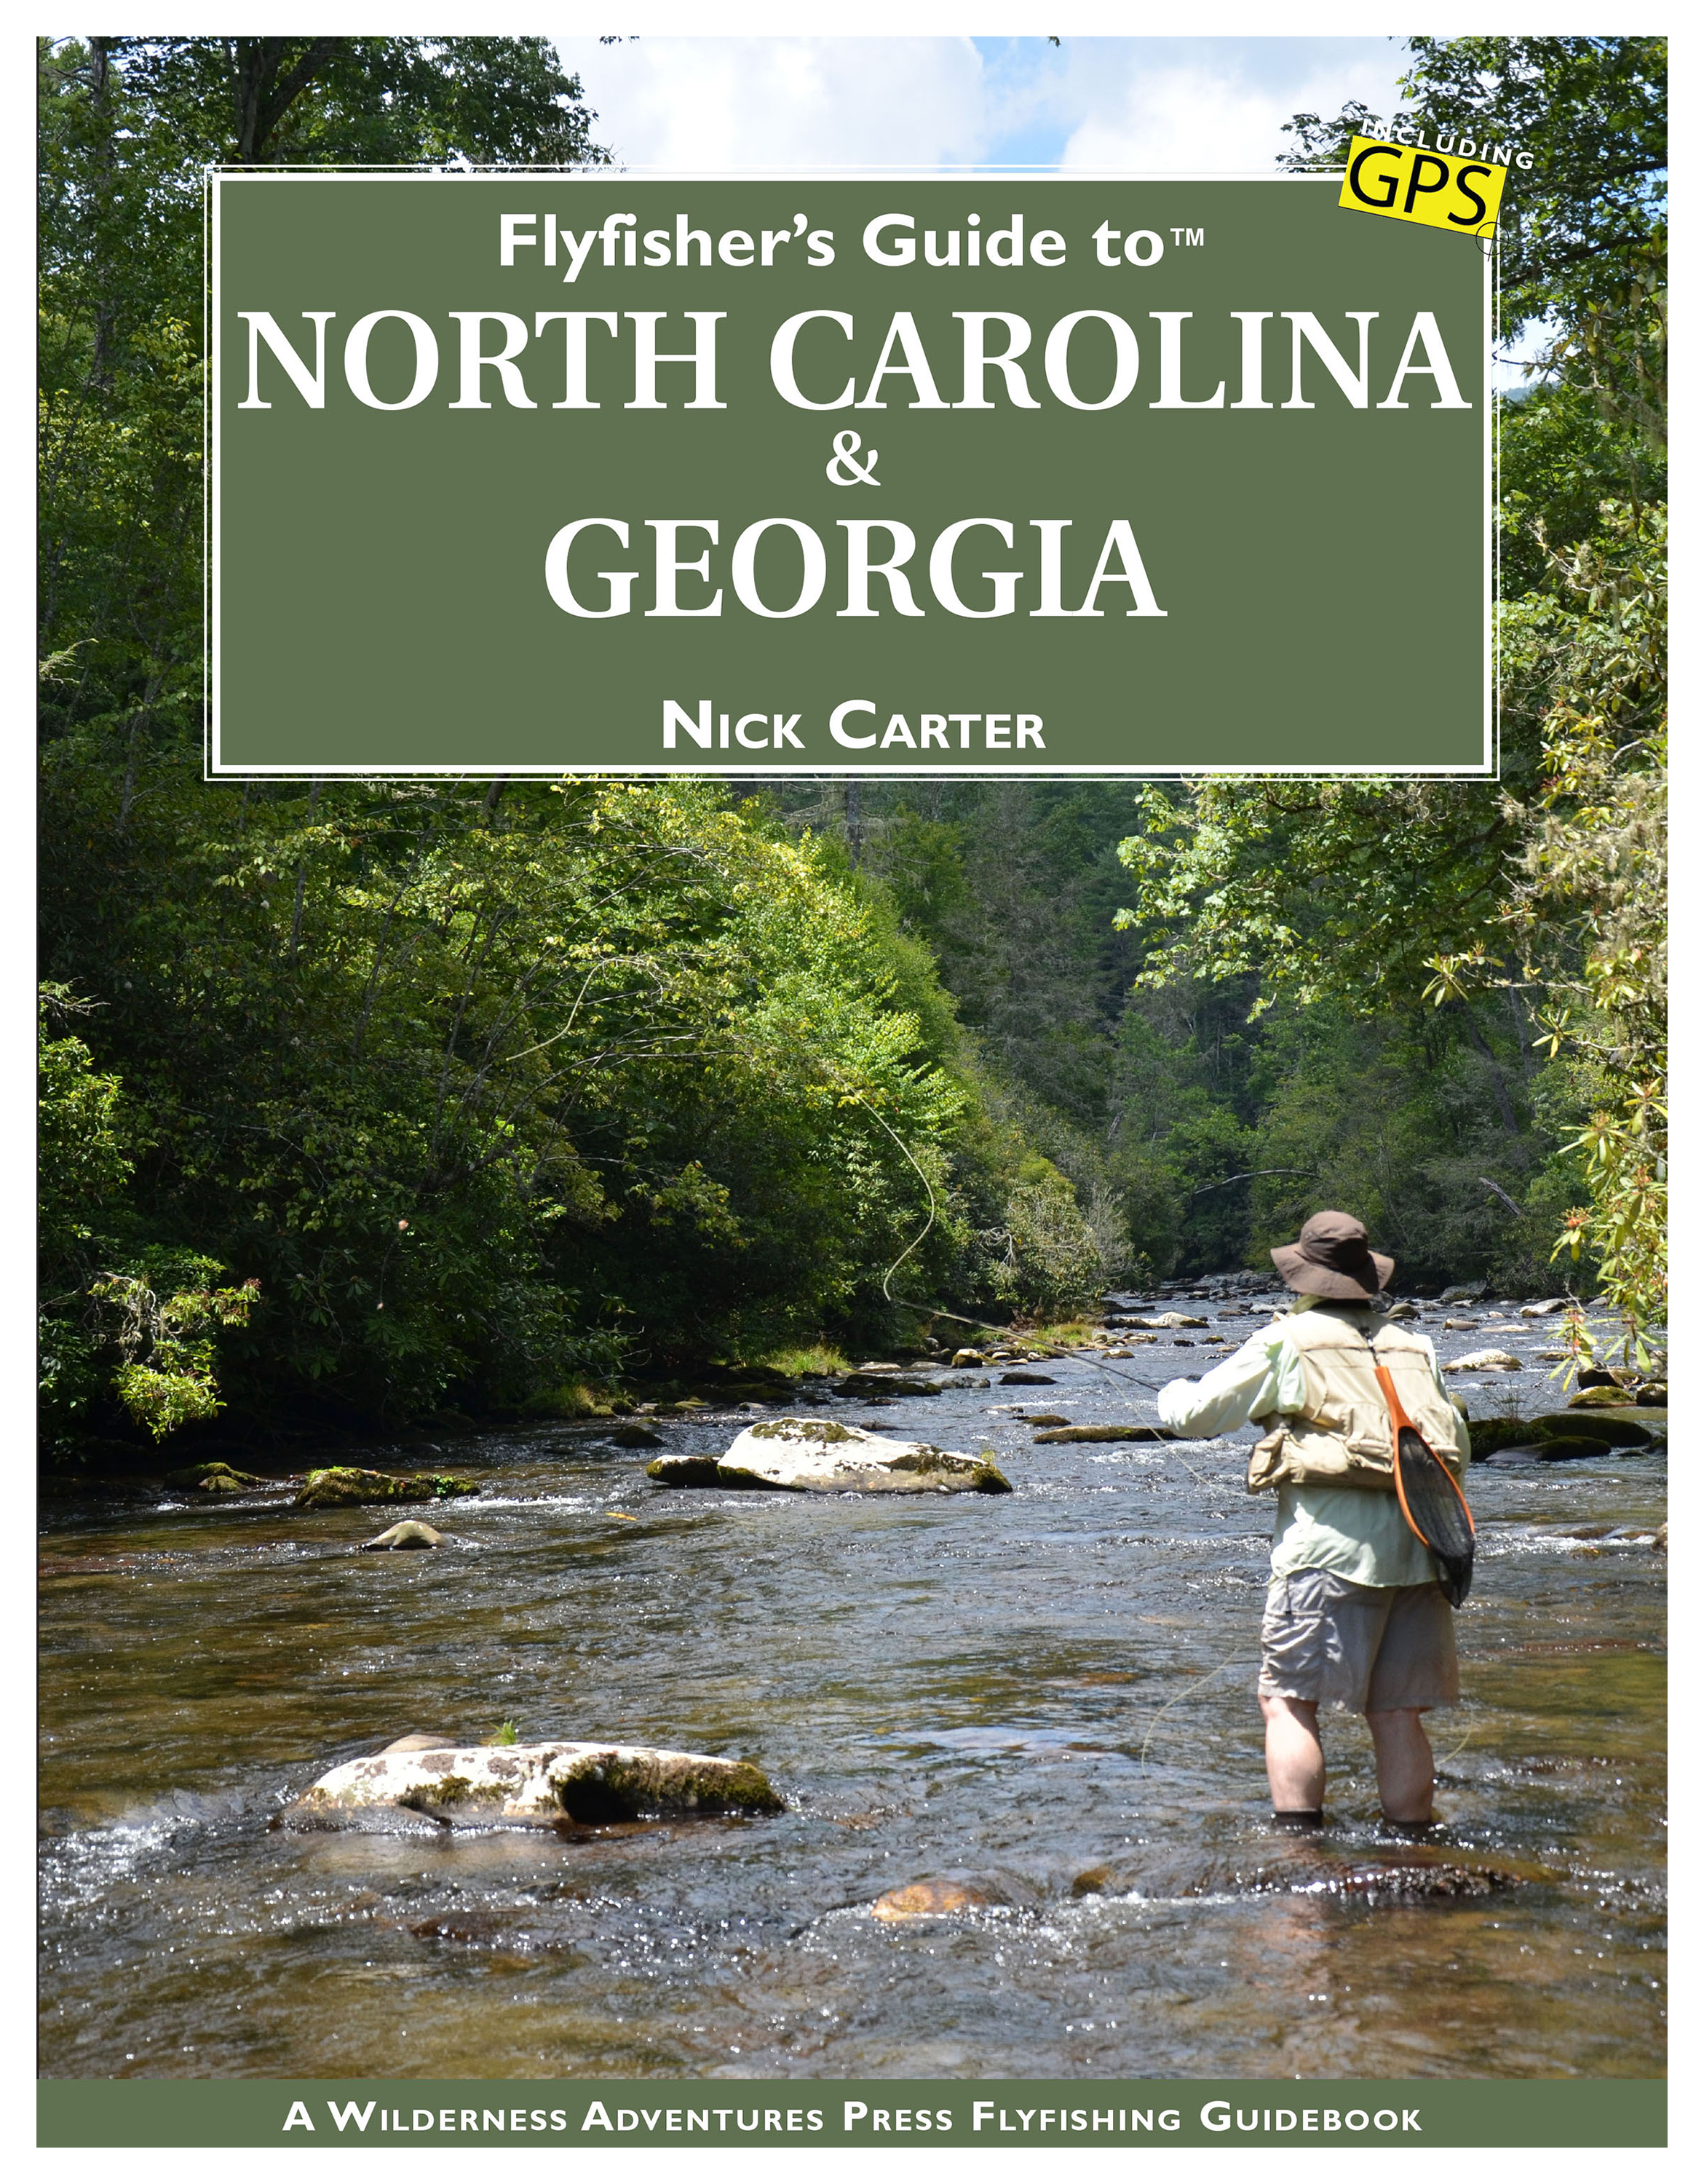 Flyfisher's Guide to North Carolina and Georgia Book by Nick